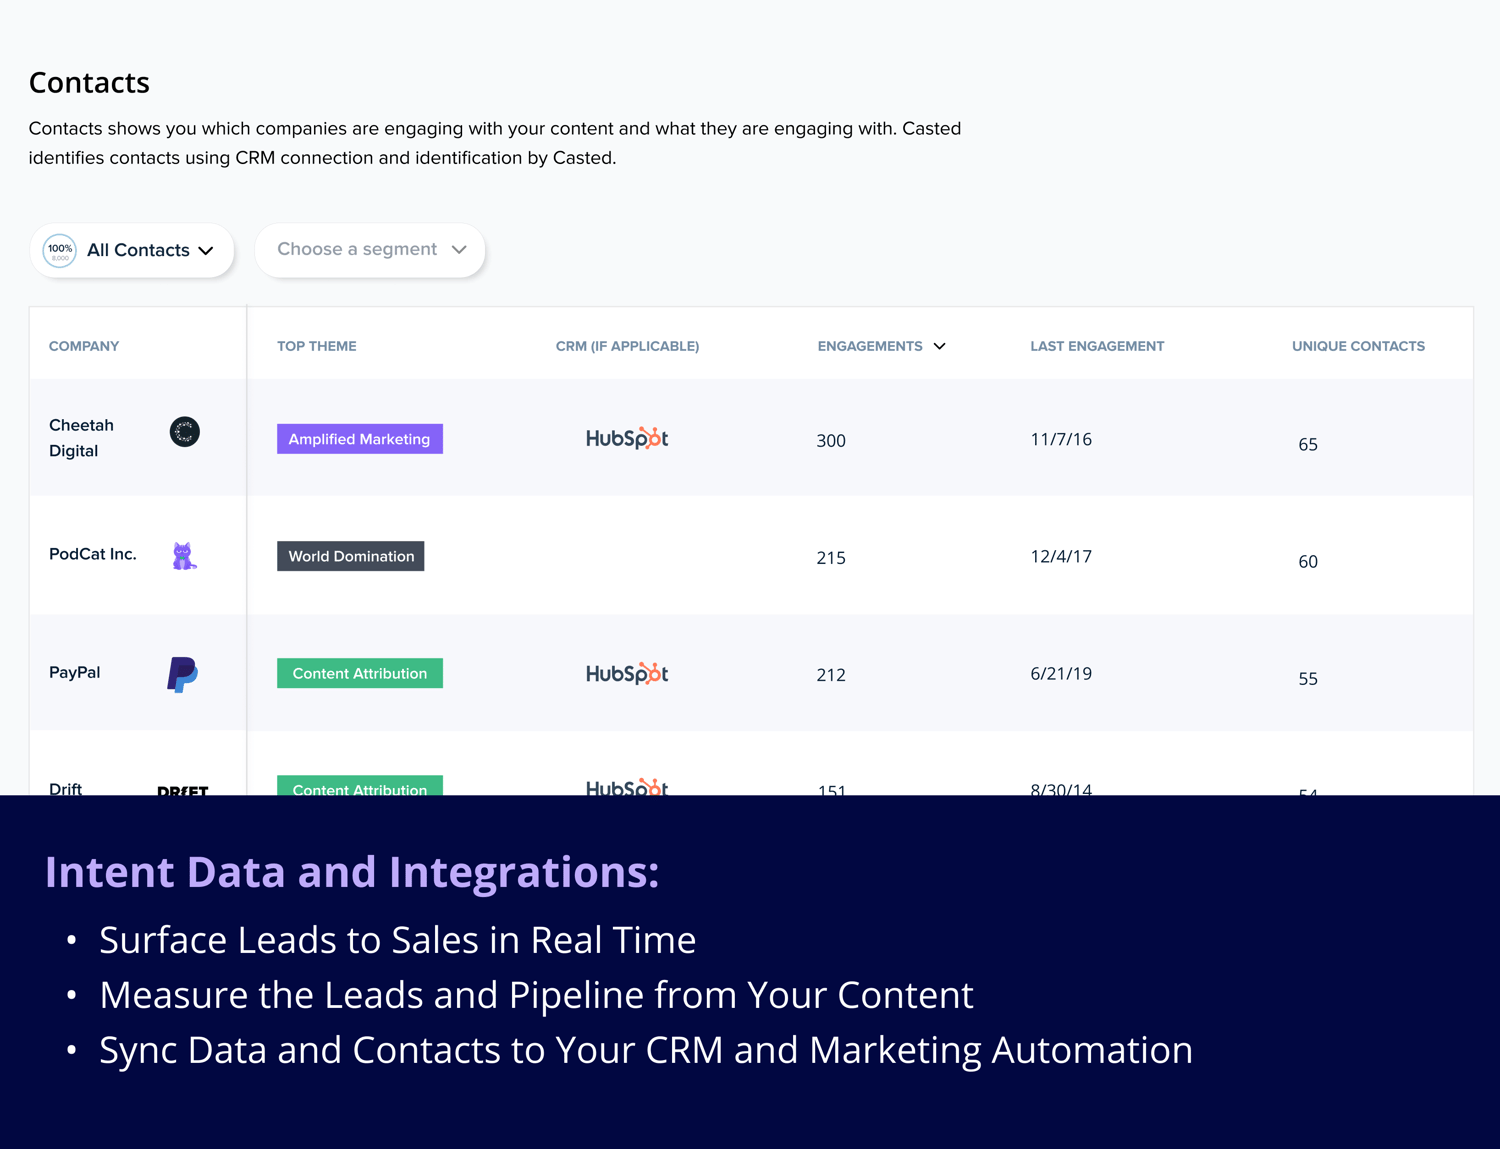 Intent Data and Integrations Graphic